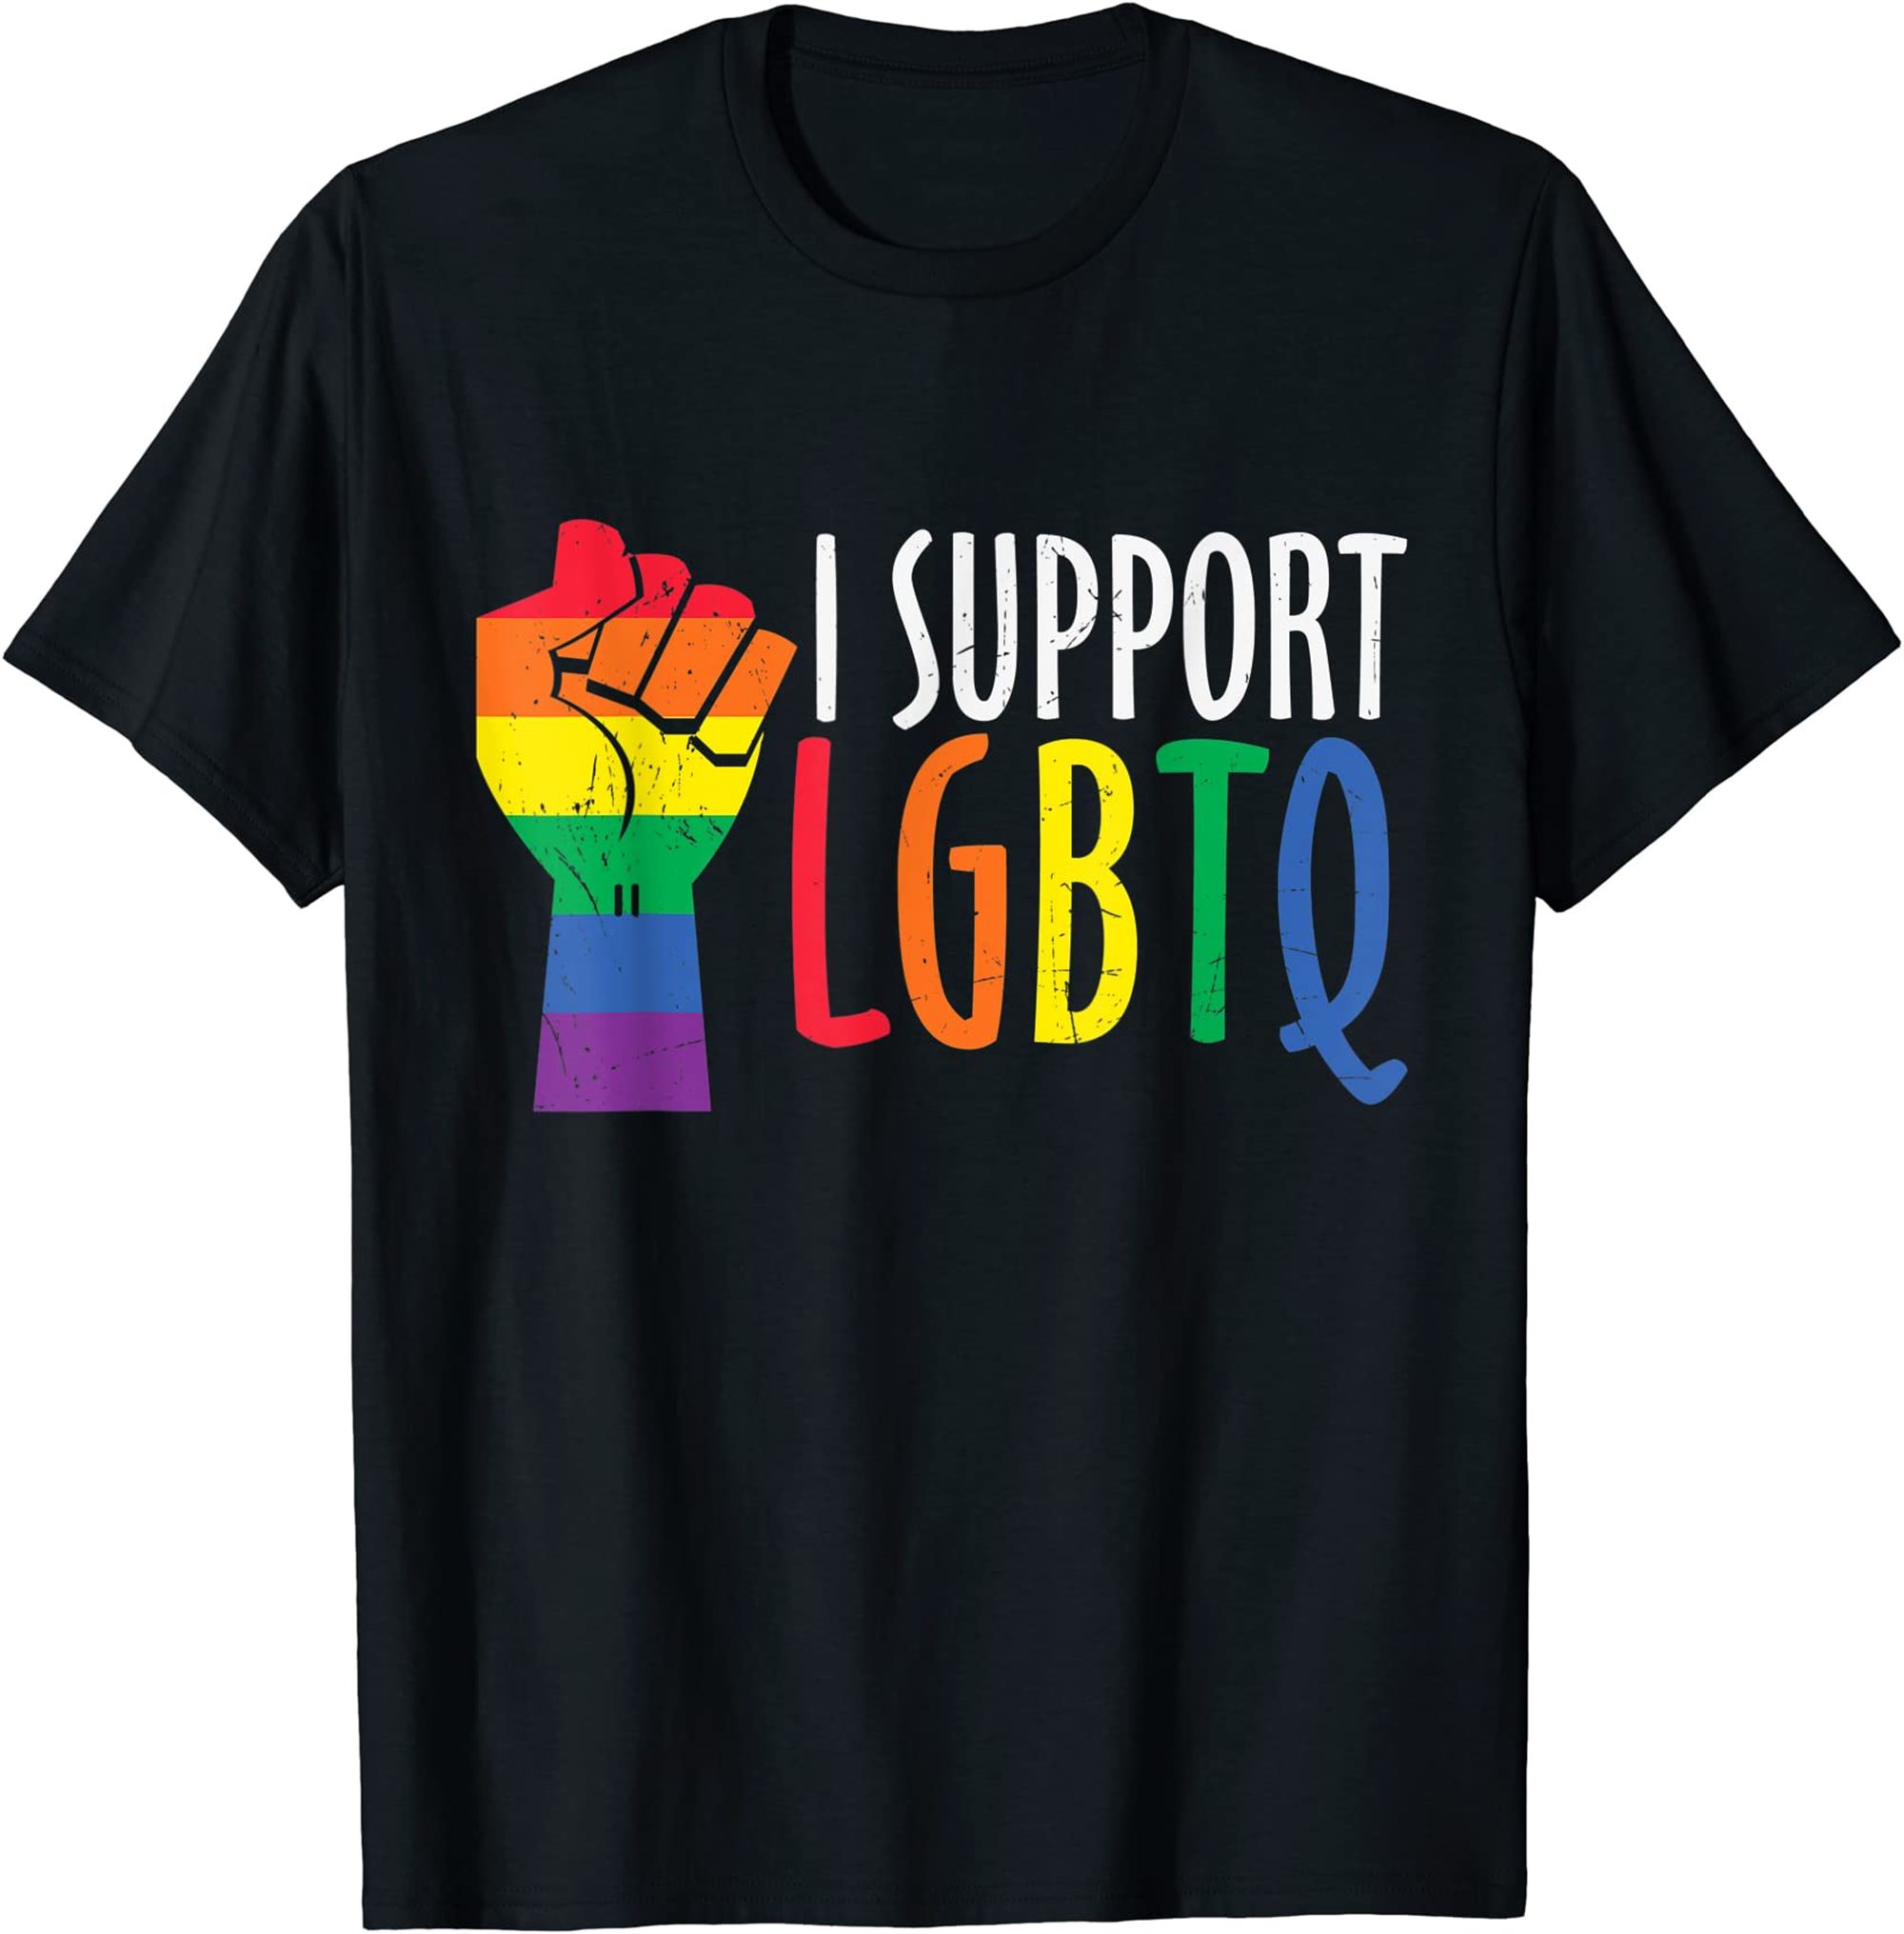 Pride Month I Support Lgbtq Lgbt Rainbow Flag T-shirt Full Size Up To 5xl